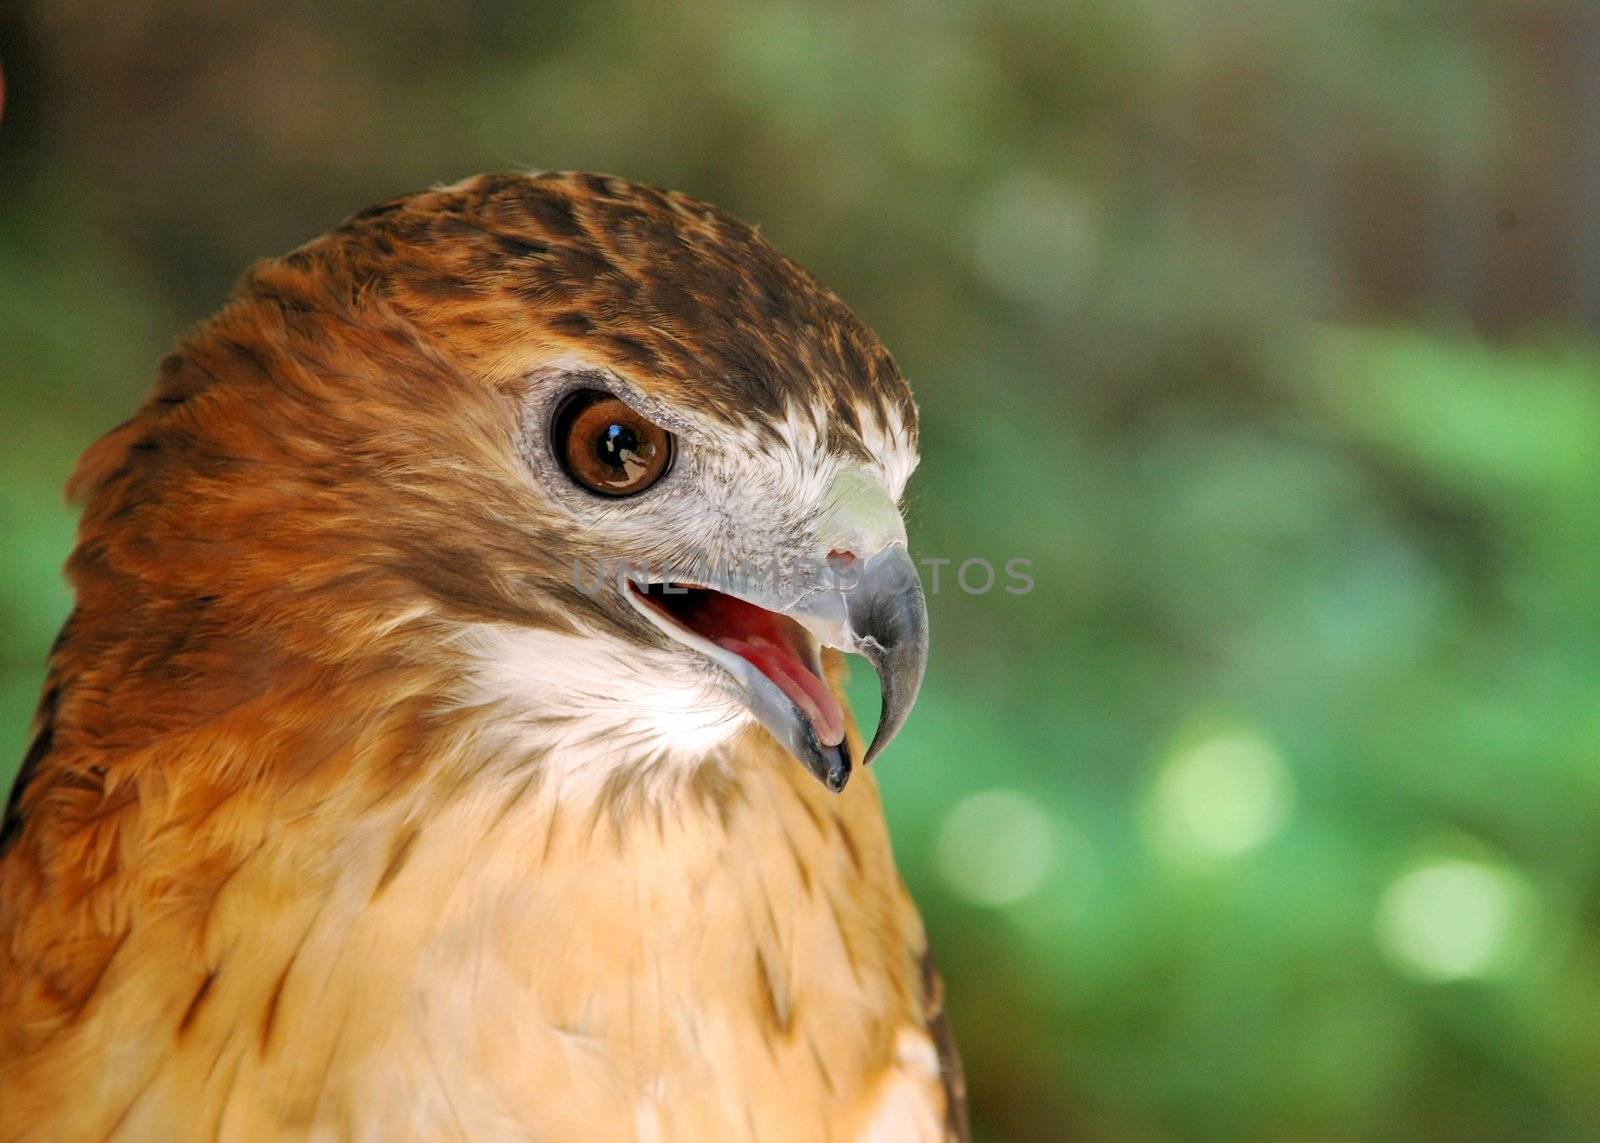 A Red-tailed hawk close-up head shot.